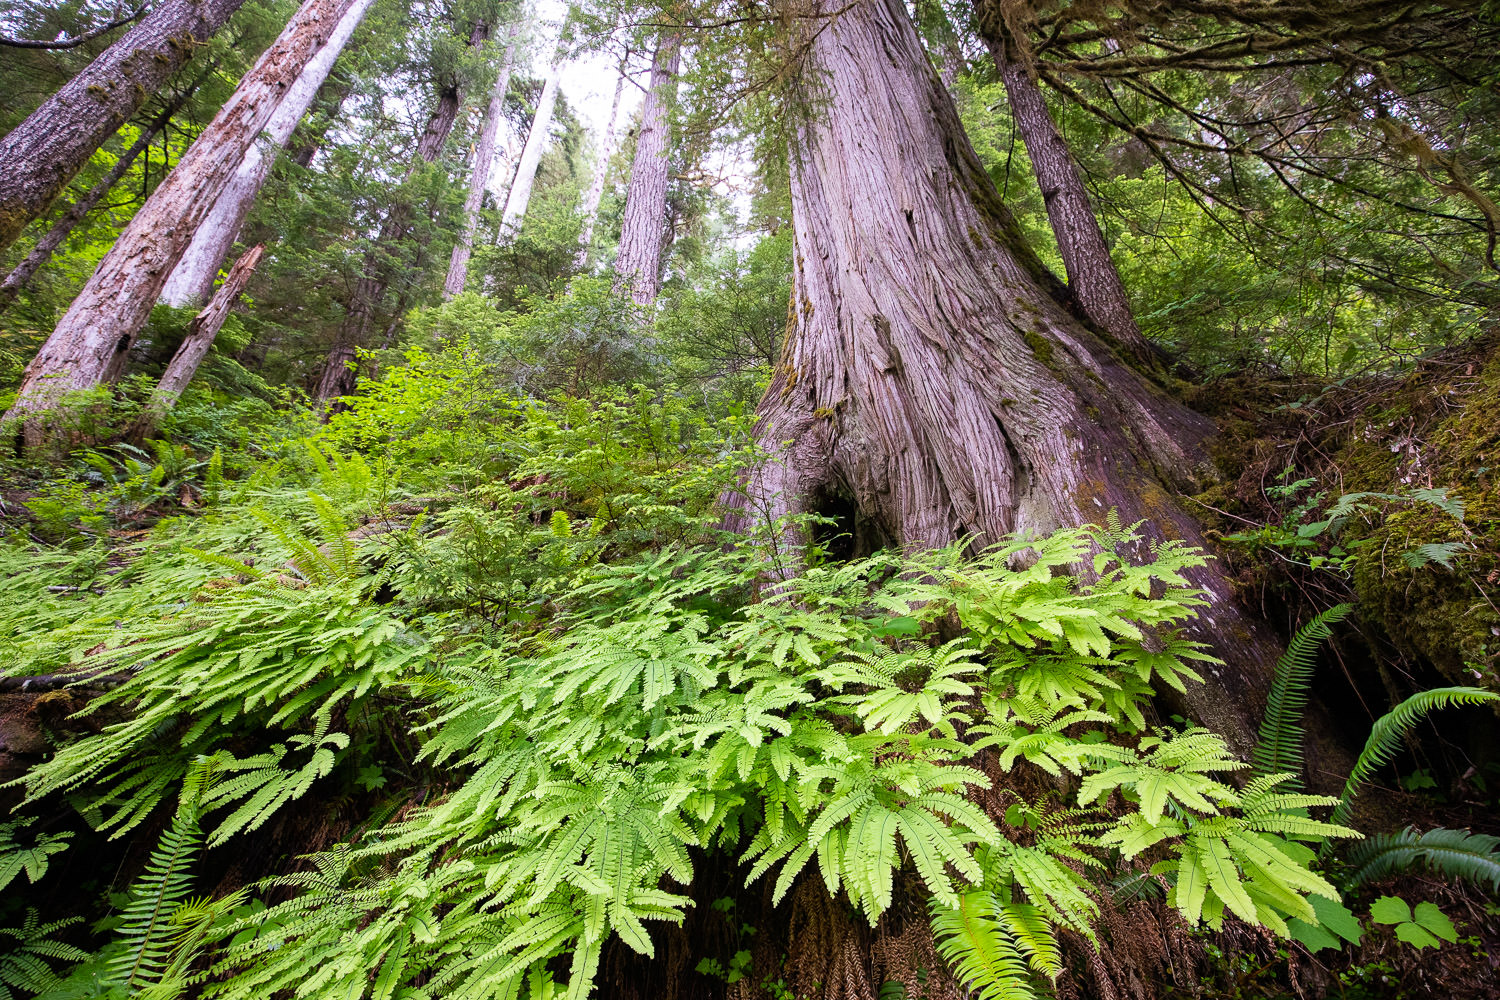 Maidenhair ferns, redcedars, and Douglas-firs adorn the steep slopes of the Taylor River.